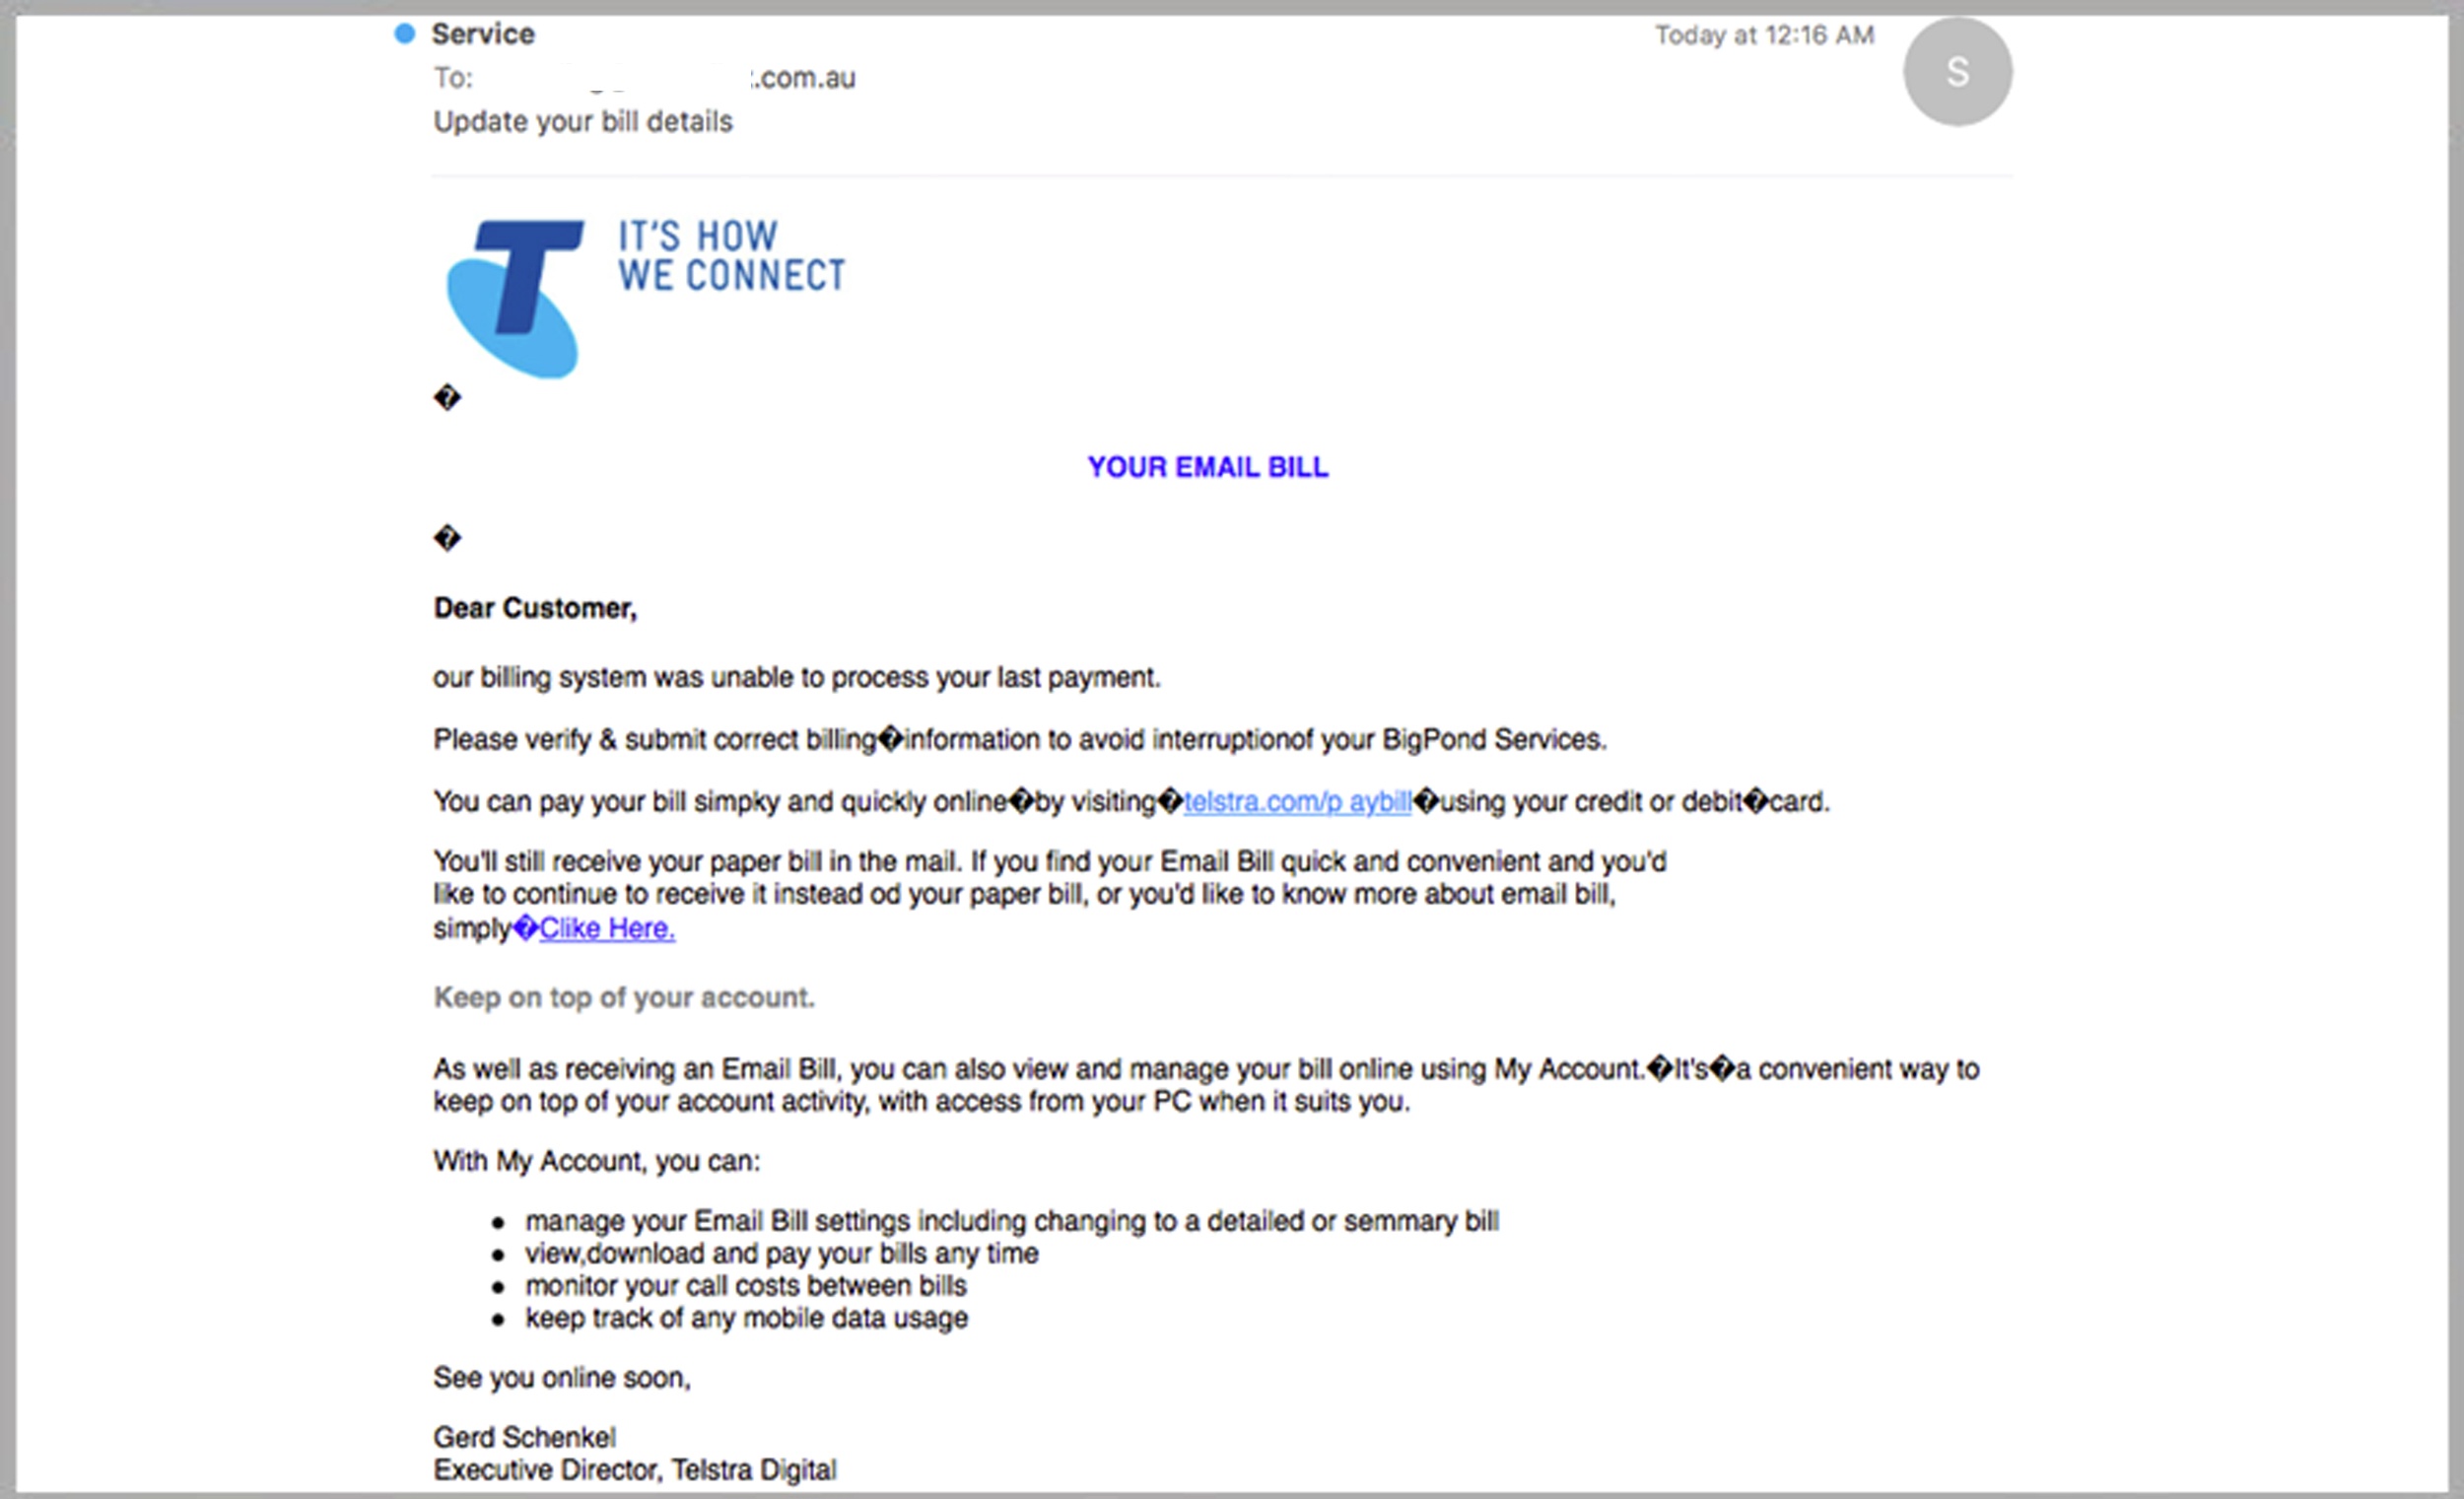 Yet Another Telstra Email Phishing Scam!